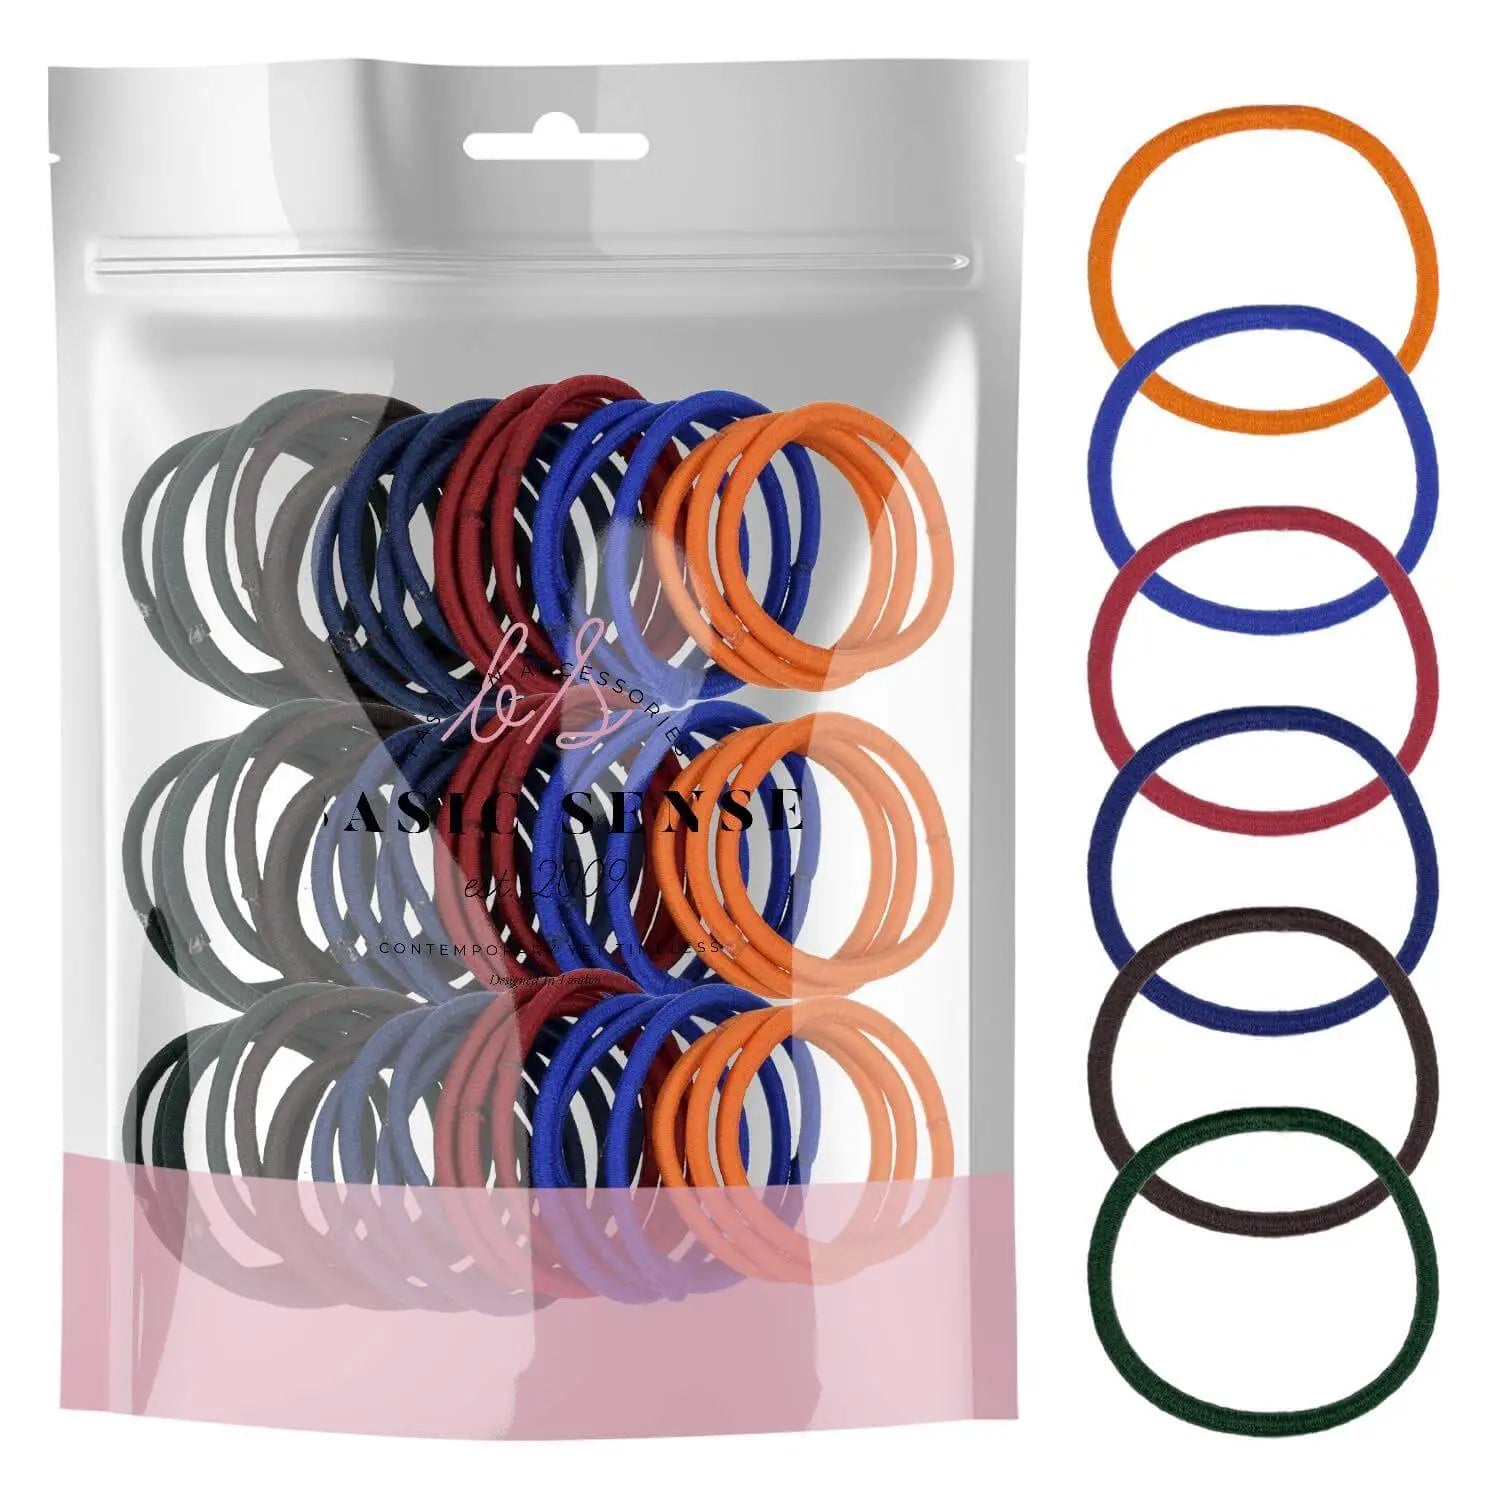 A bag of assorted color hair ties, 60 pieces